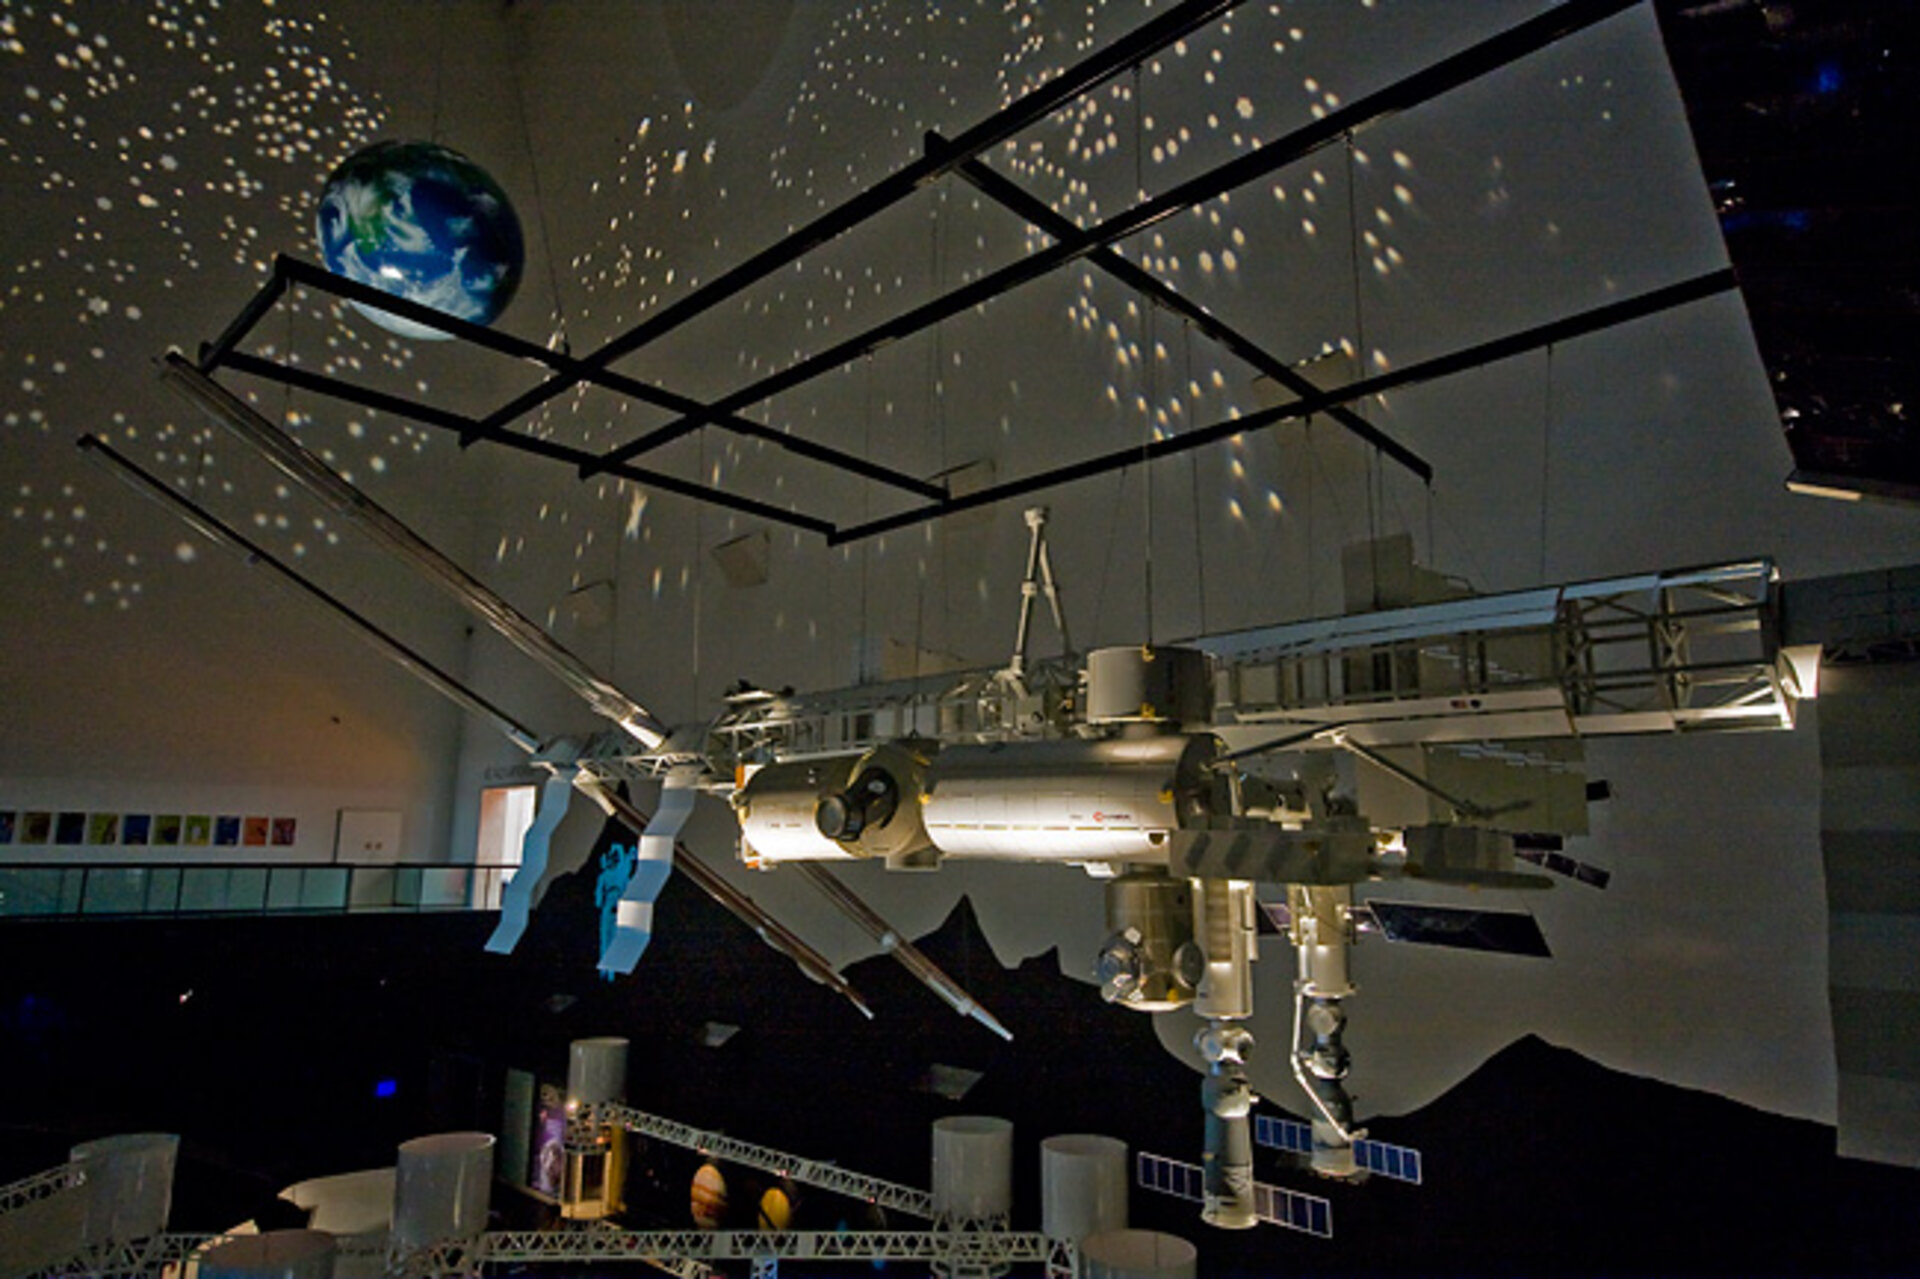 The ISS model